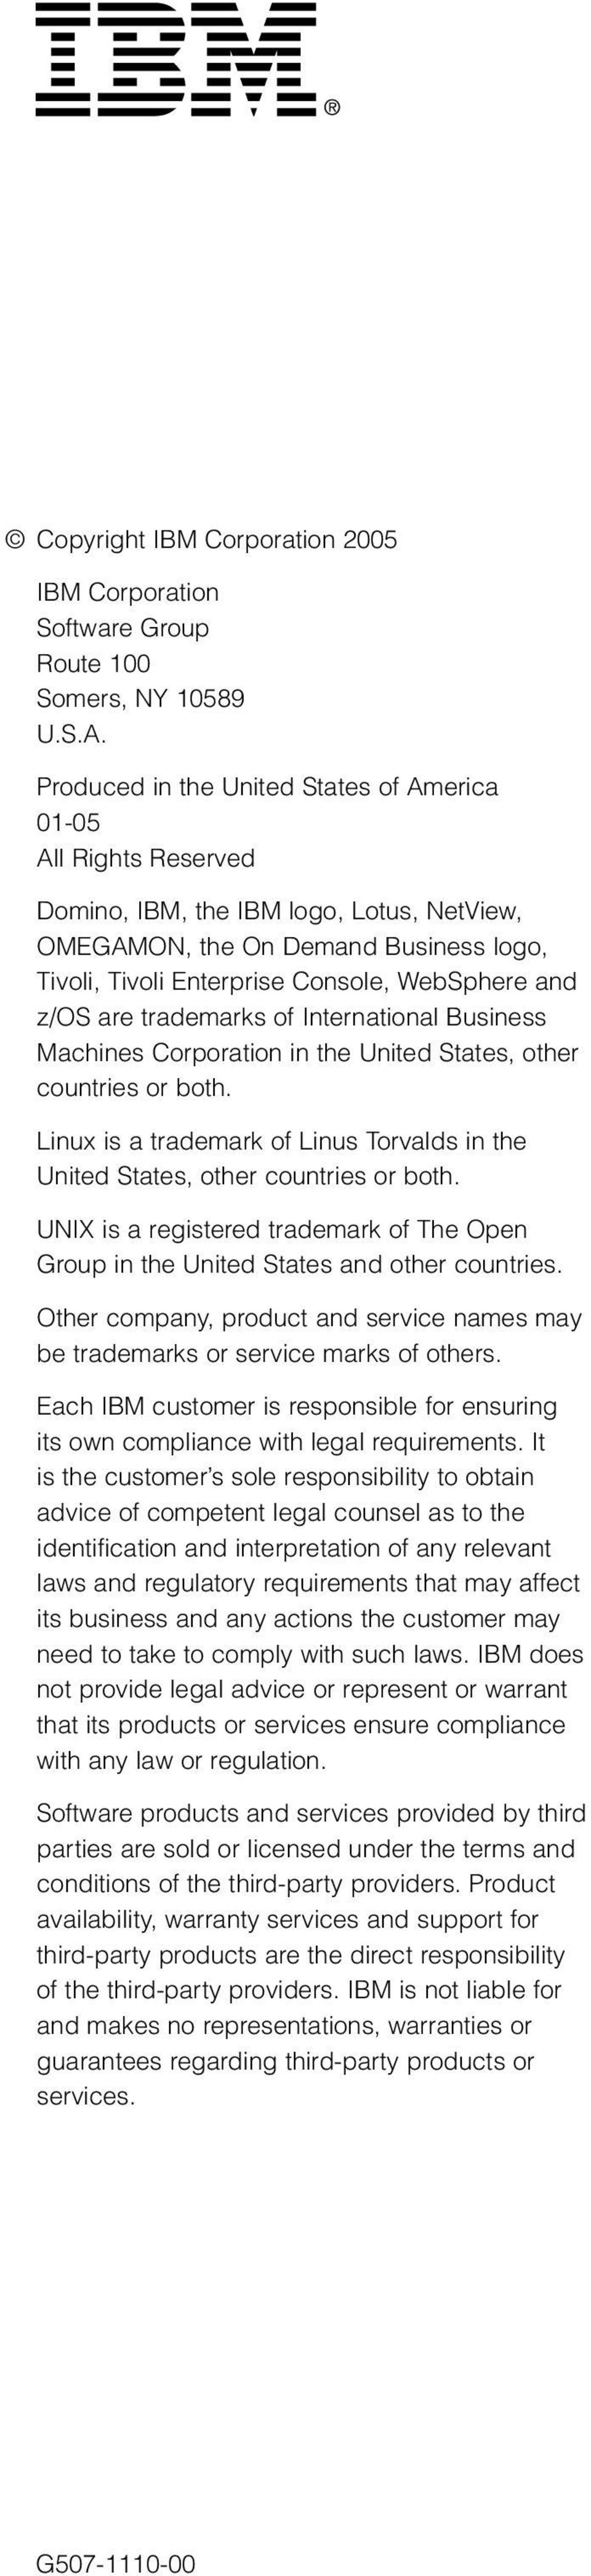 z/os are trademarks of International Business Machines Corporation in the United States, other countries or both. Linux is a trademark of Linus Torvalds in the United States, other countries or both.